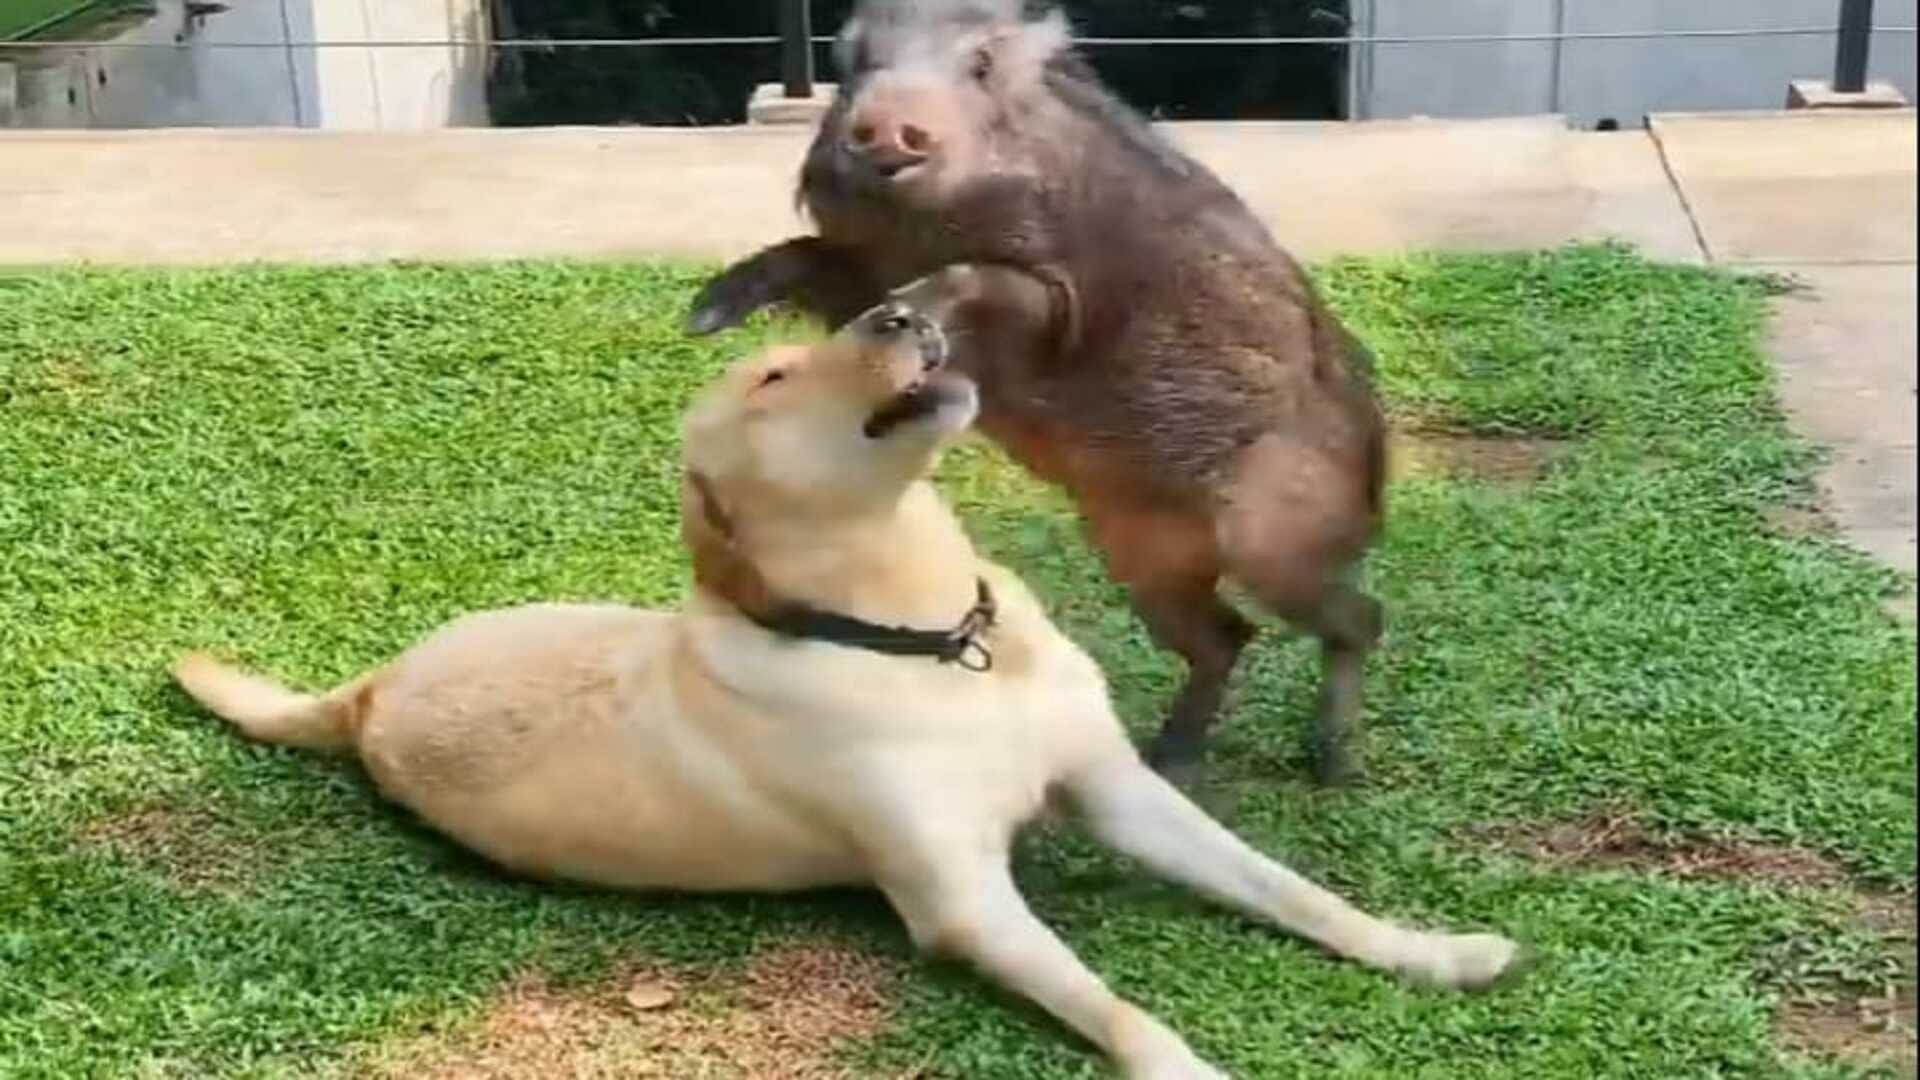 Wild boar has not mother then a Labrador dog gives her love like mother